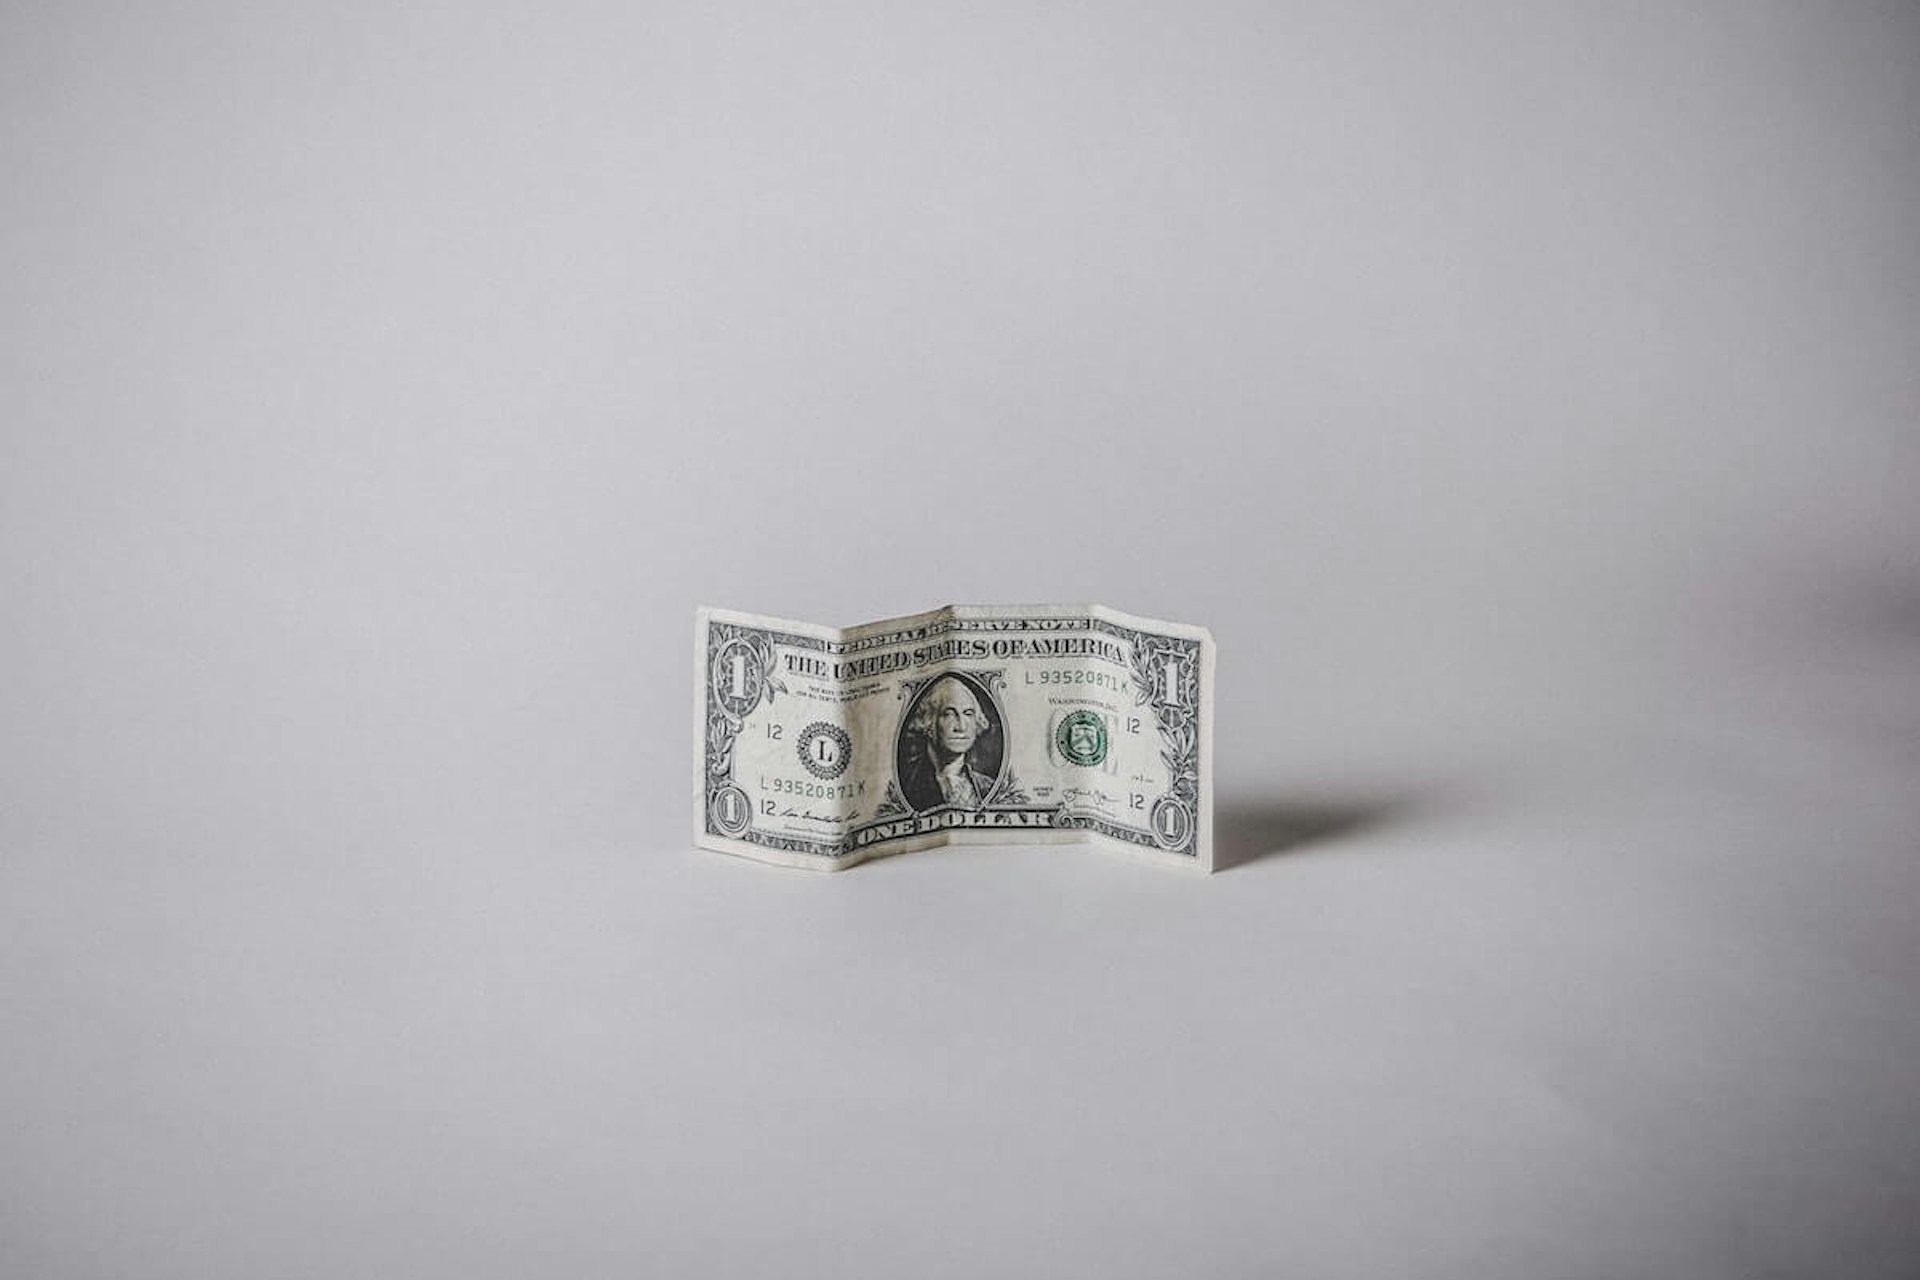 1 US dollar banknote against a white background for showcasing how much media monitoring costs